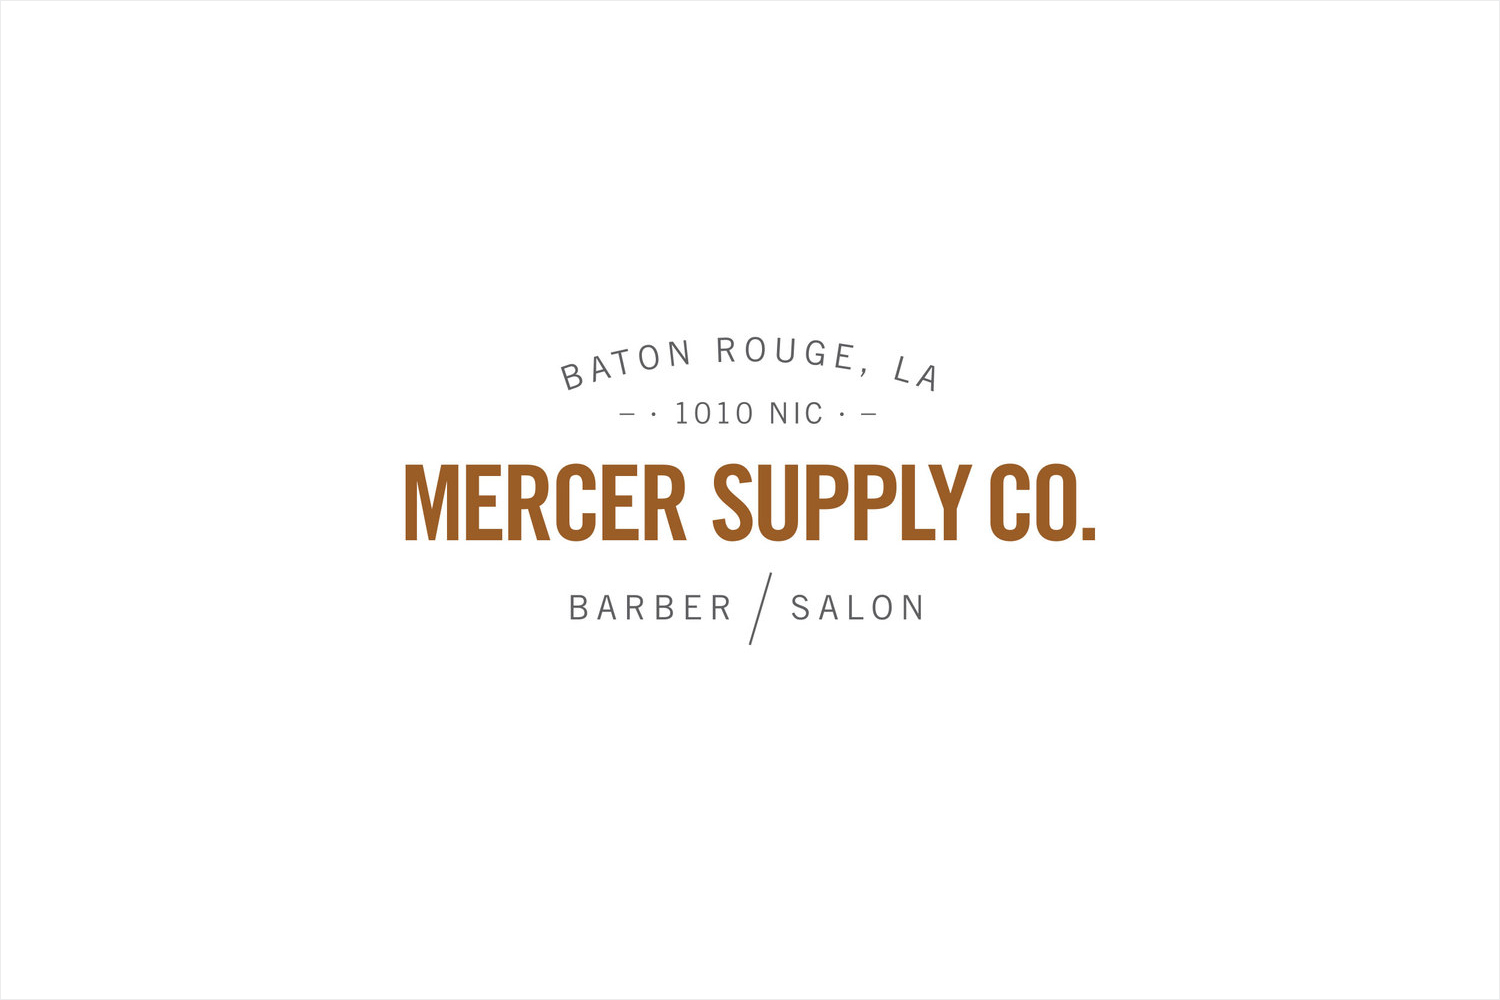 Logotype for salon and barber Mercer Supply Co. designed by Tennessee studio Peck & Co.